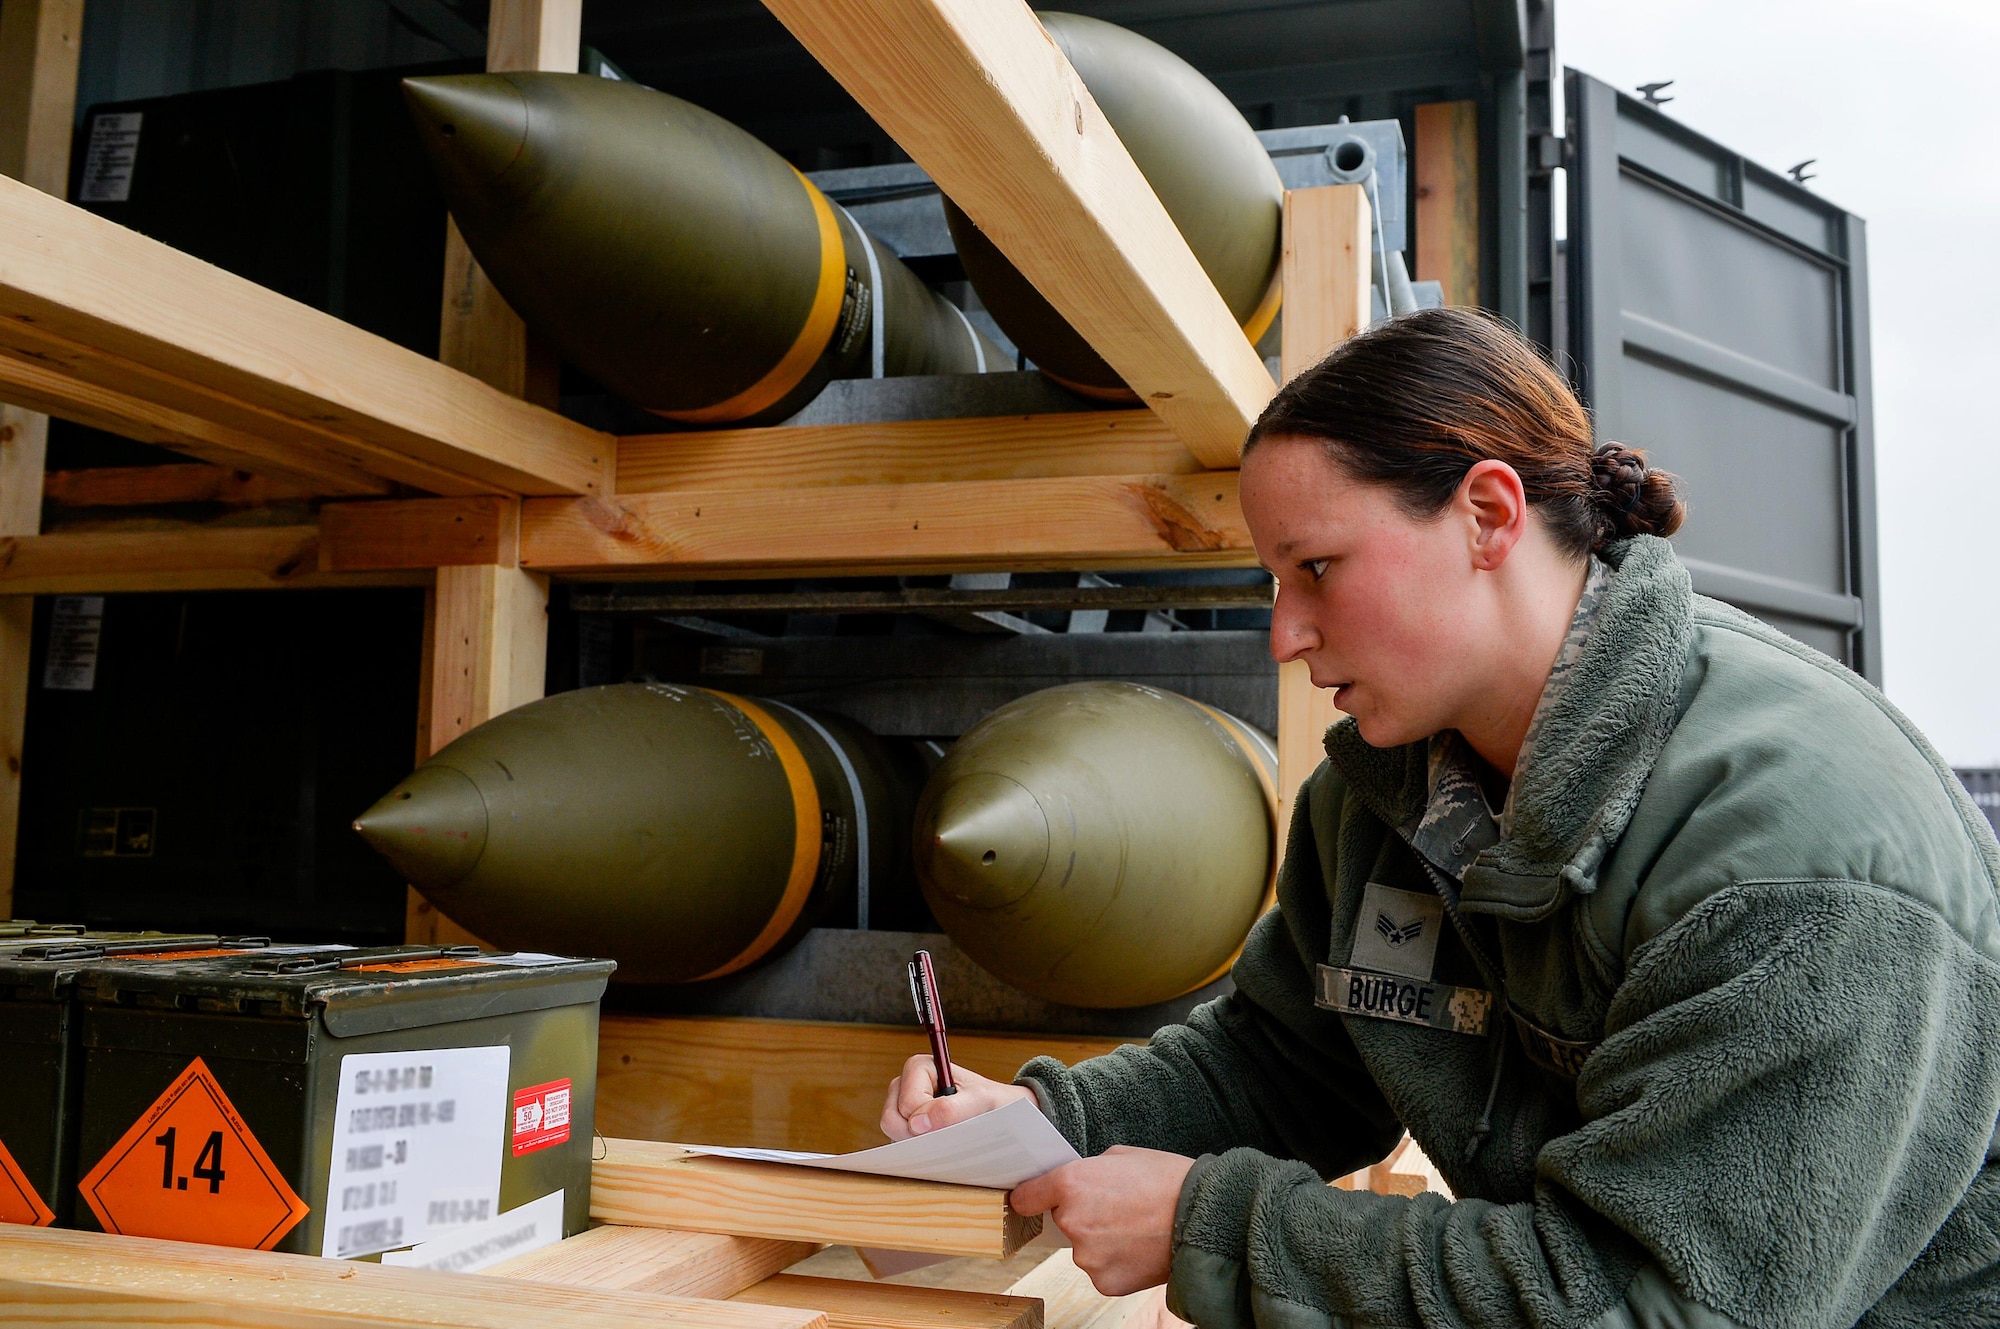 Senior Airman Jordan Burge, 86th Munitions Squadron munitions operations technician, takes accountability of ammunition at Ramstein Air Base, Germany, Oct. 26, 2016. Airmen of the 86th MUNS inspect, sort and ship munitions according to the intended destinations. (U.S. Air Force photo by Airman 1st Class Joshua Magbanua)